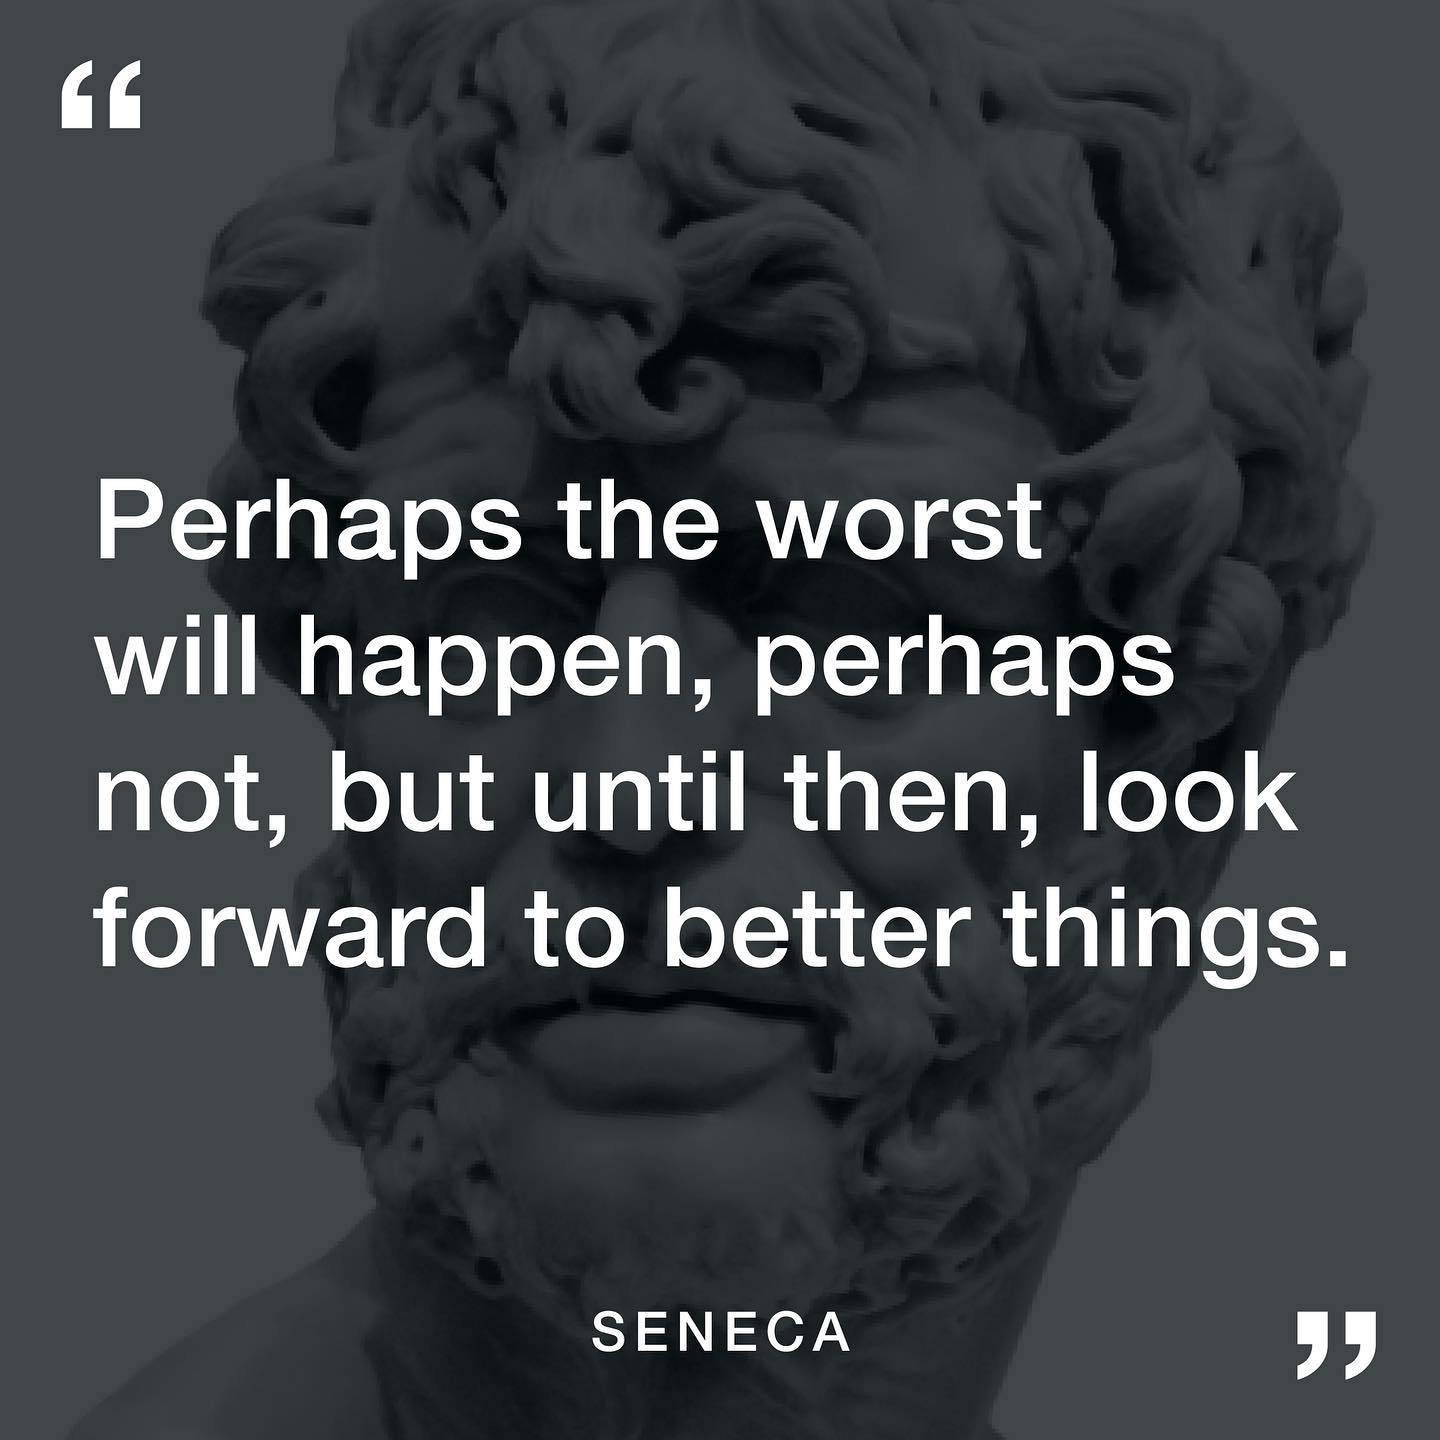 Perhaps the worst will happen, perhaps not, until then, look forward to better things.–Seneca